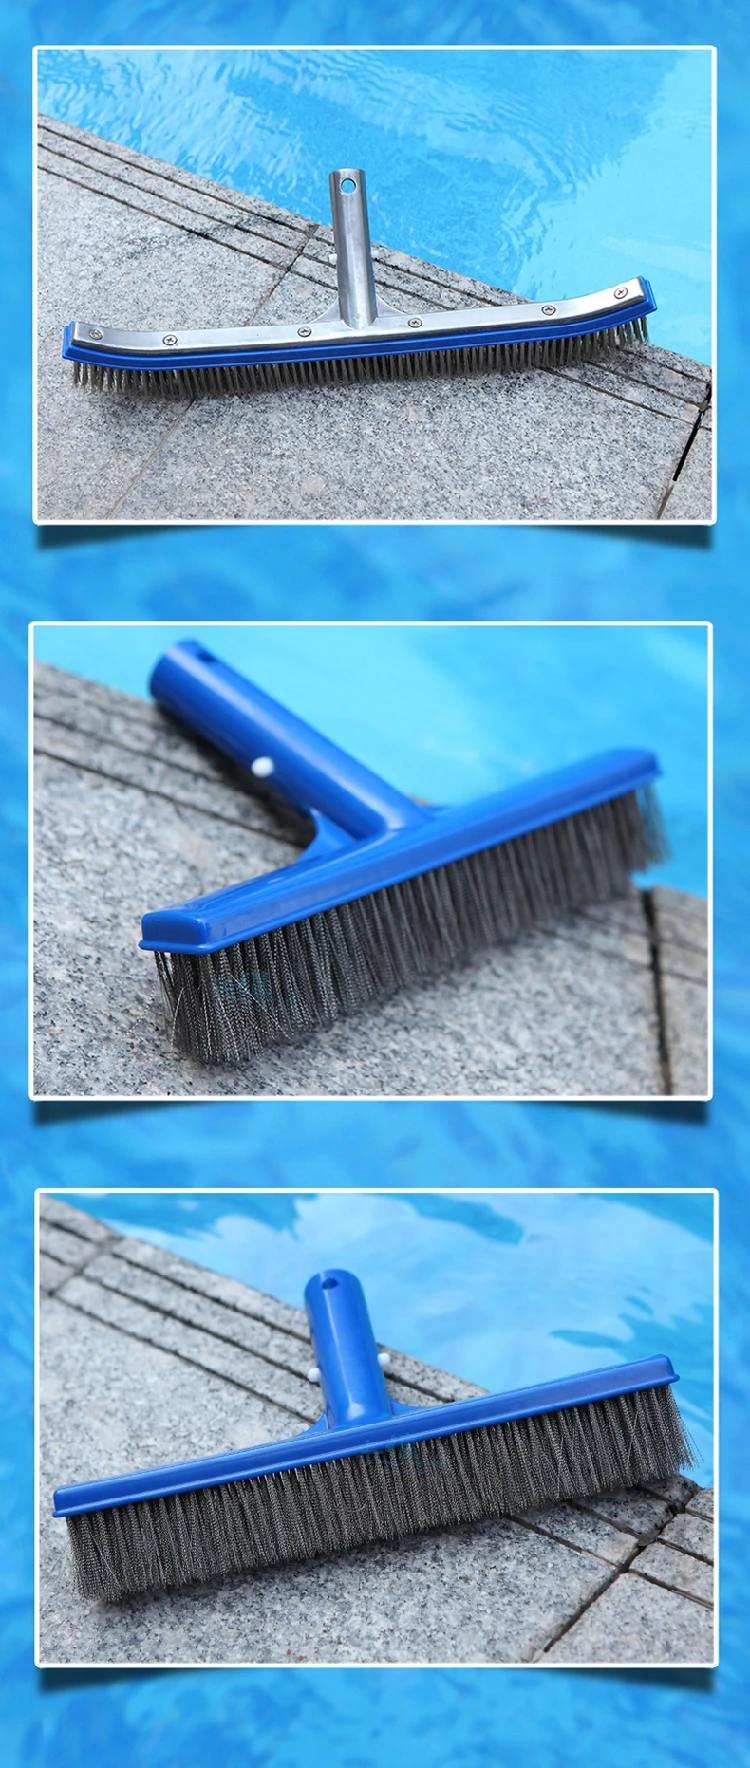 Stainless Steel Scrub Pool Brush Heavy Duty For Cleaning Pool Walls With Suction